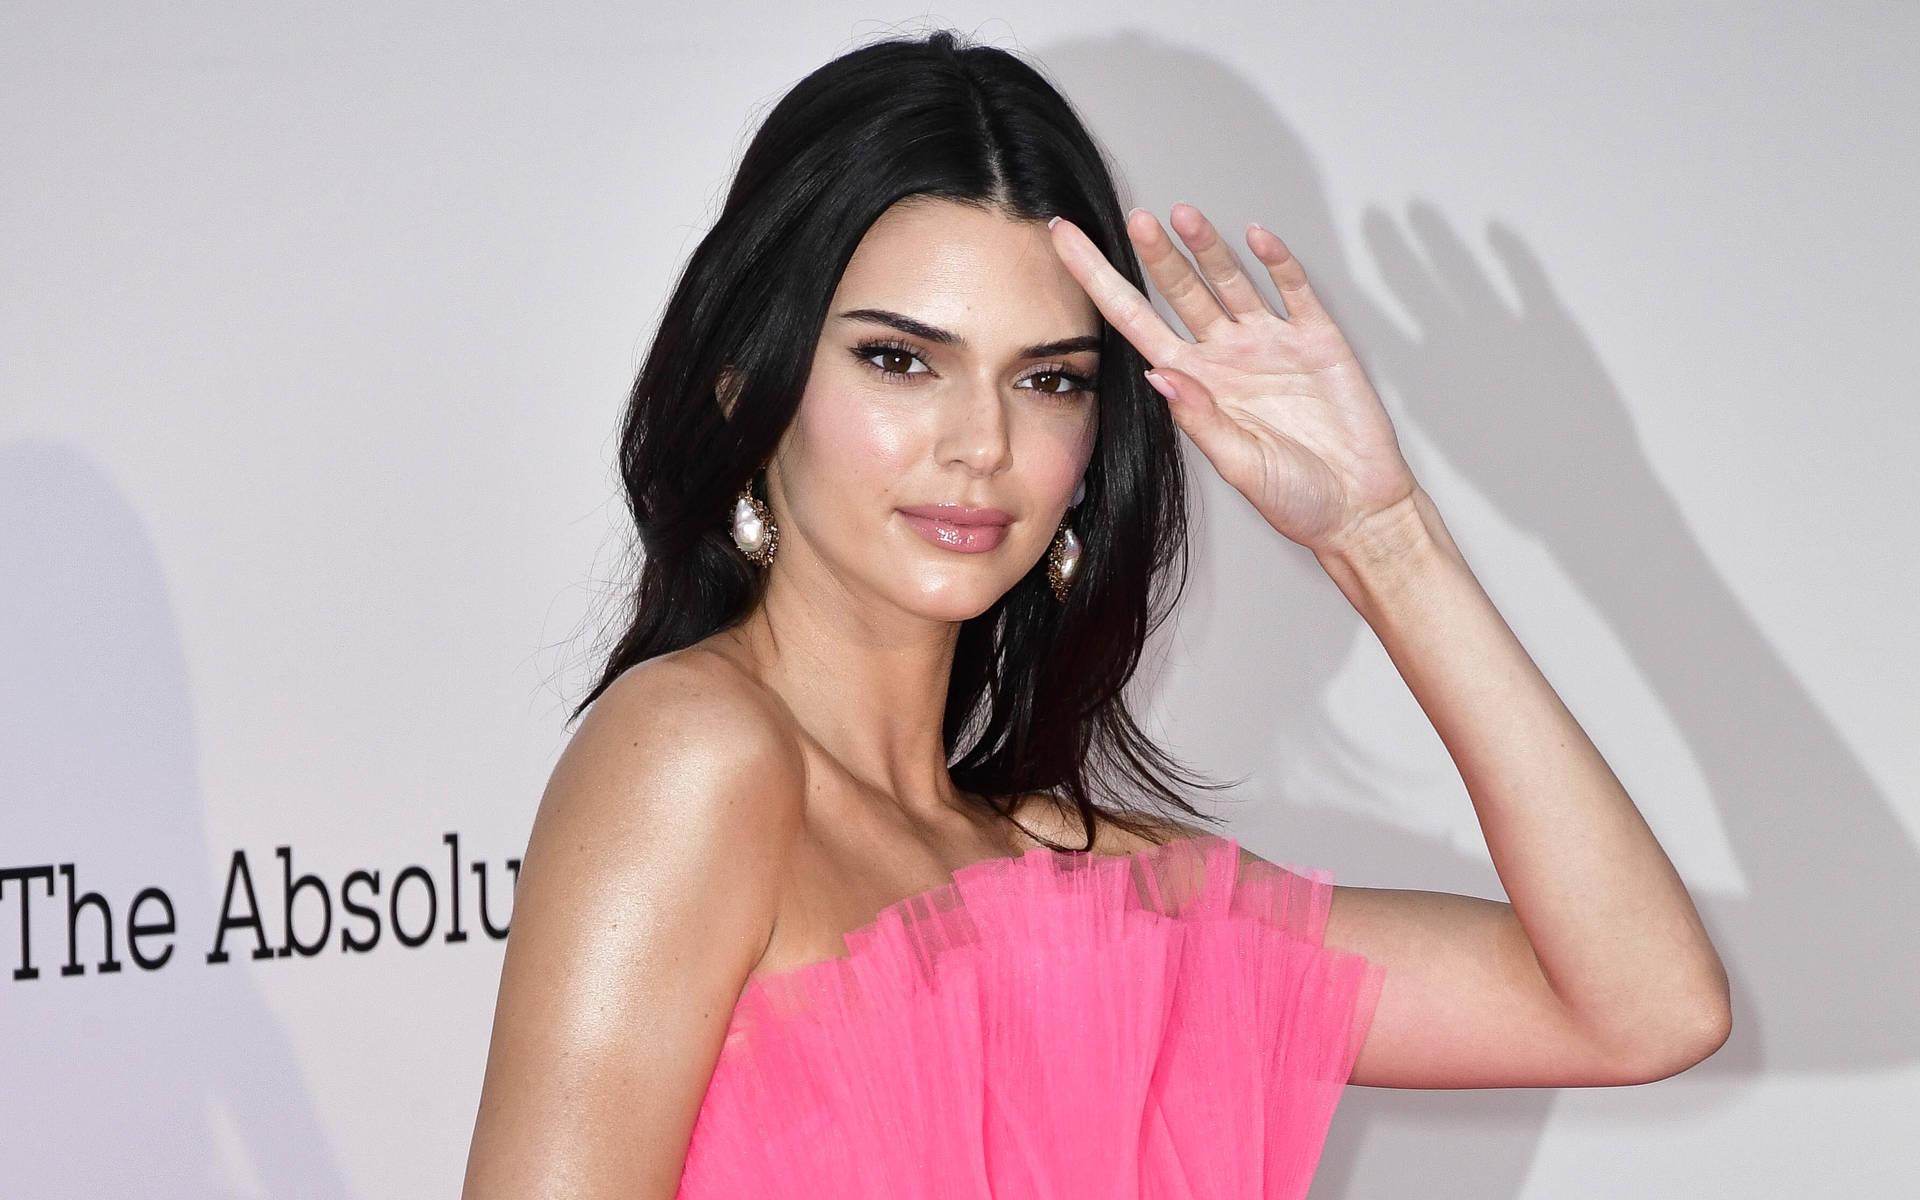 Kendall Jenner reunited with ex Ben Simmons on New Year's